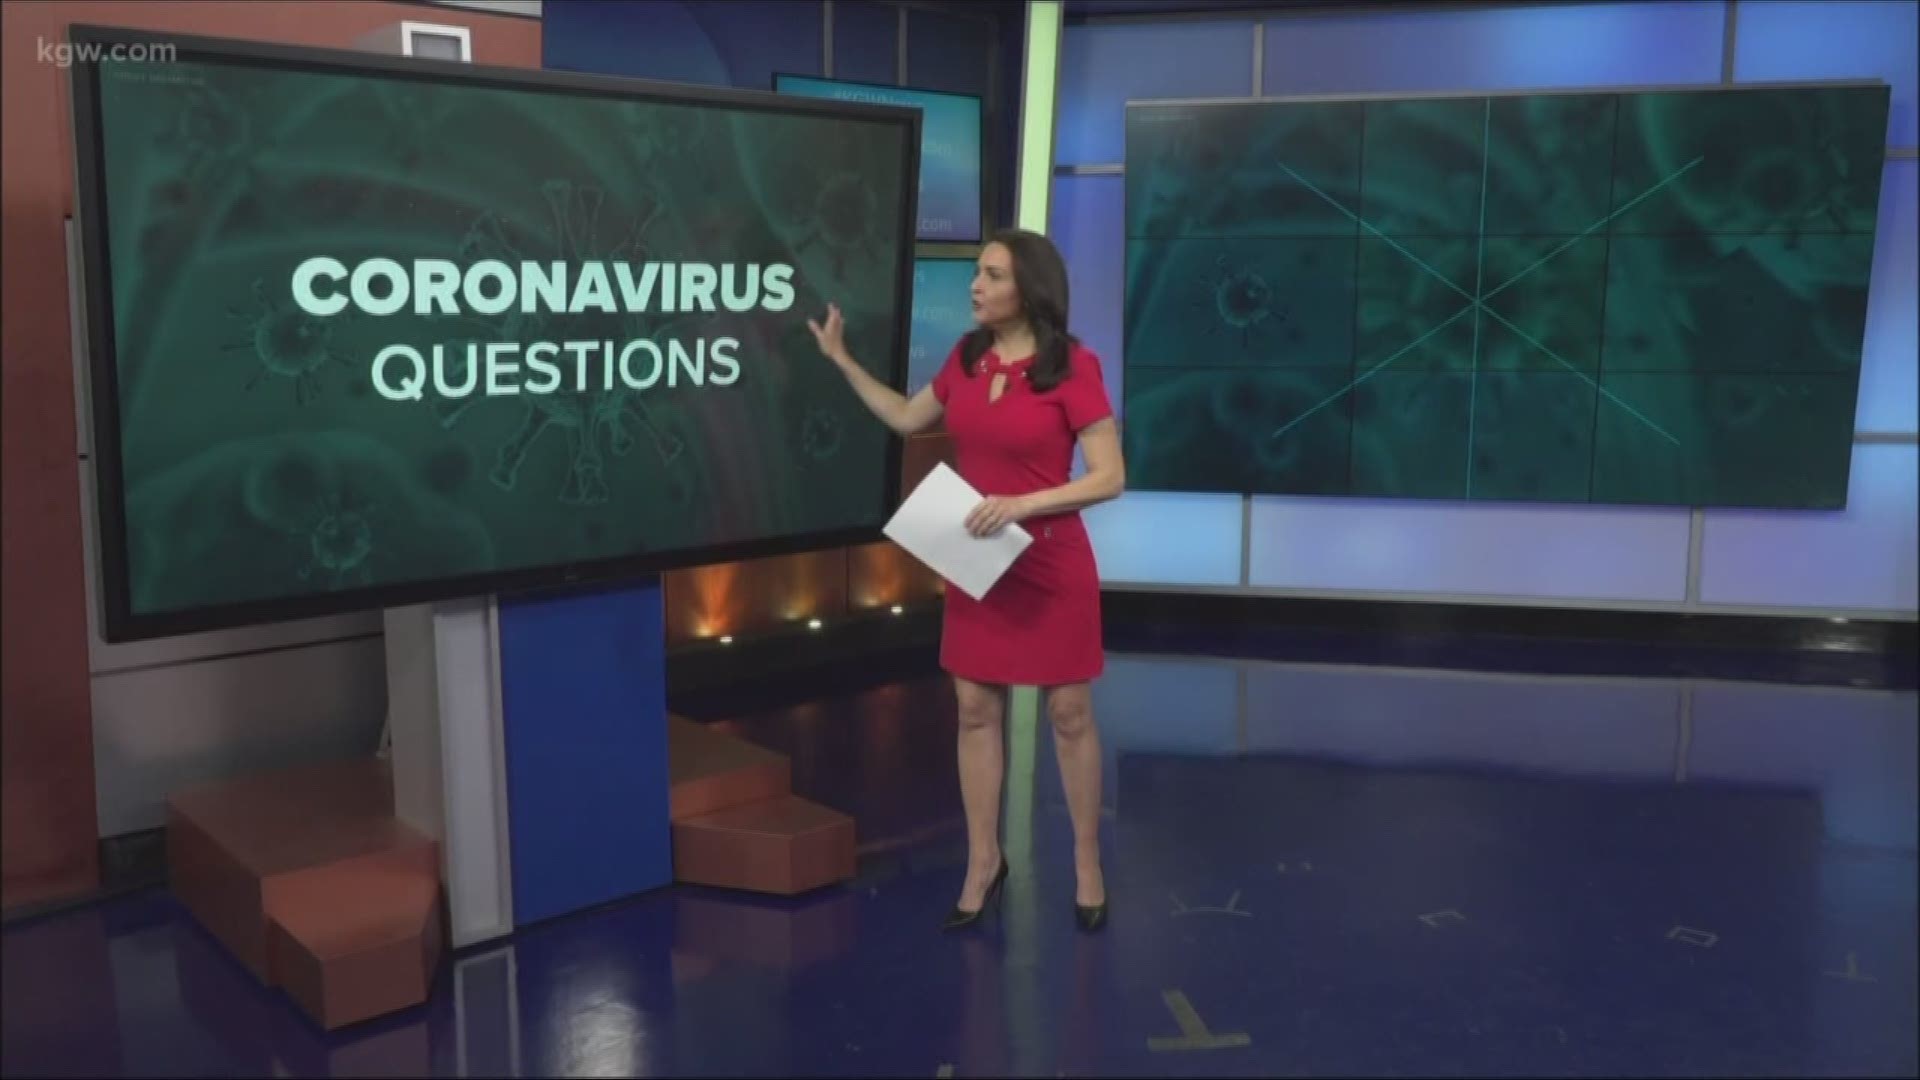 As the outbreak continues, we’re answering your questions about the coronavirus.